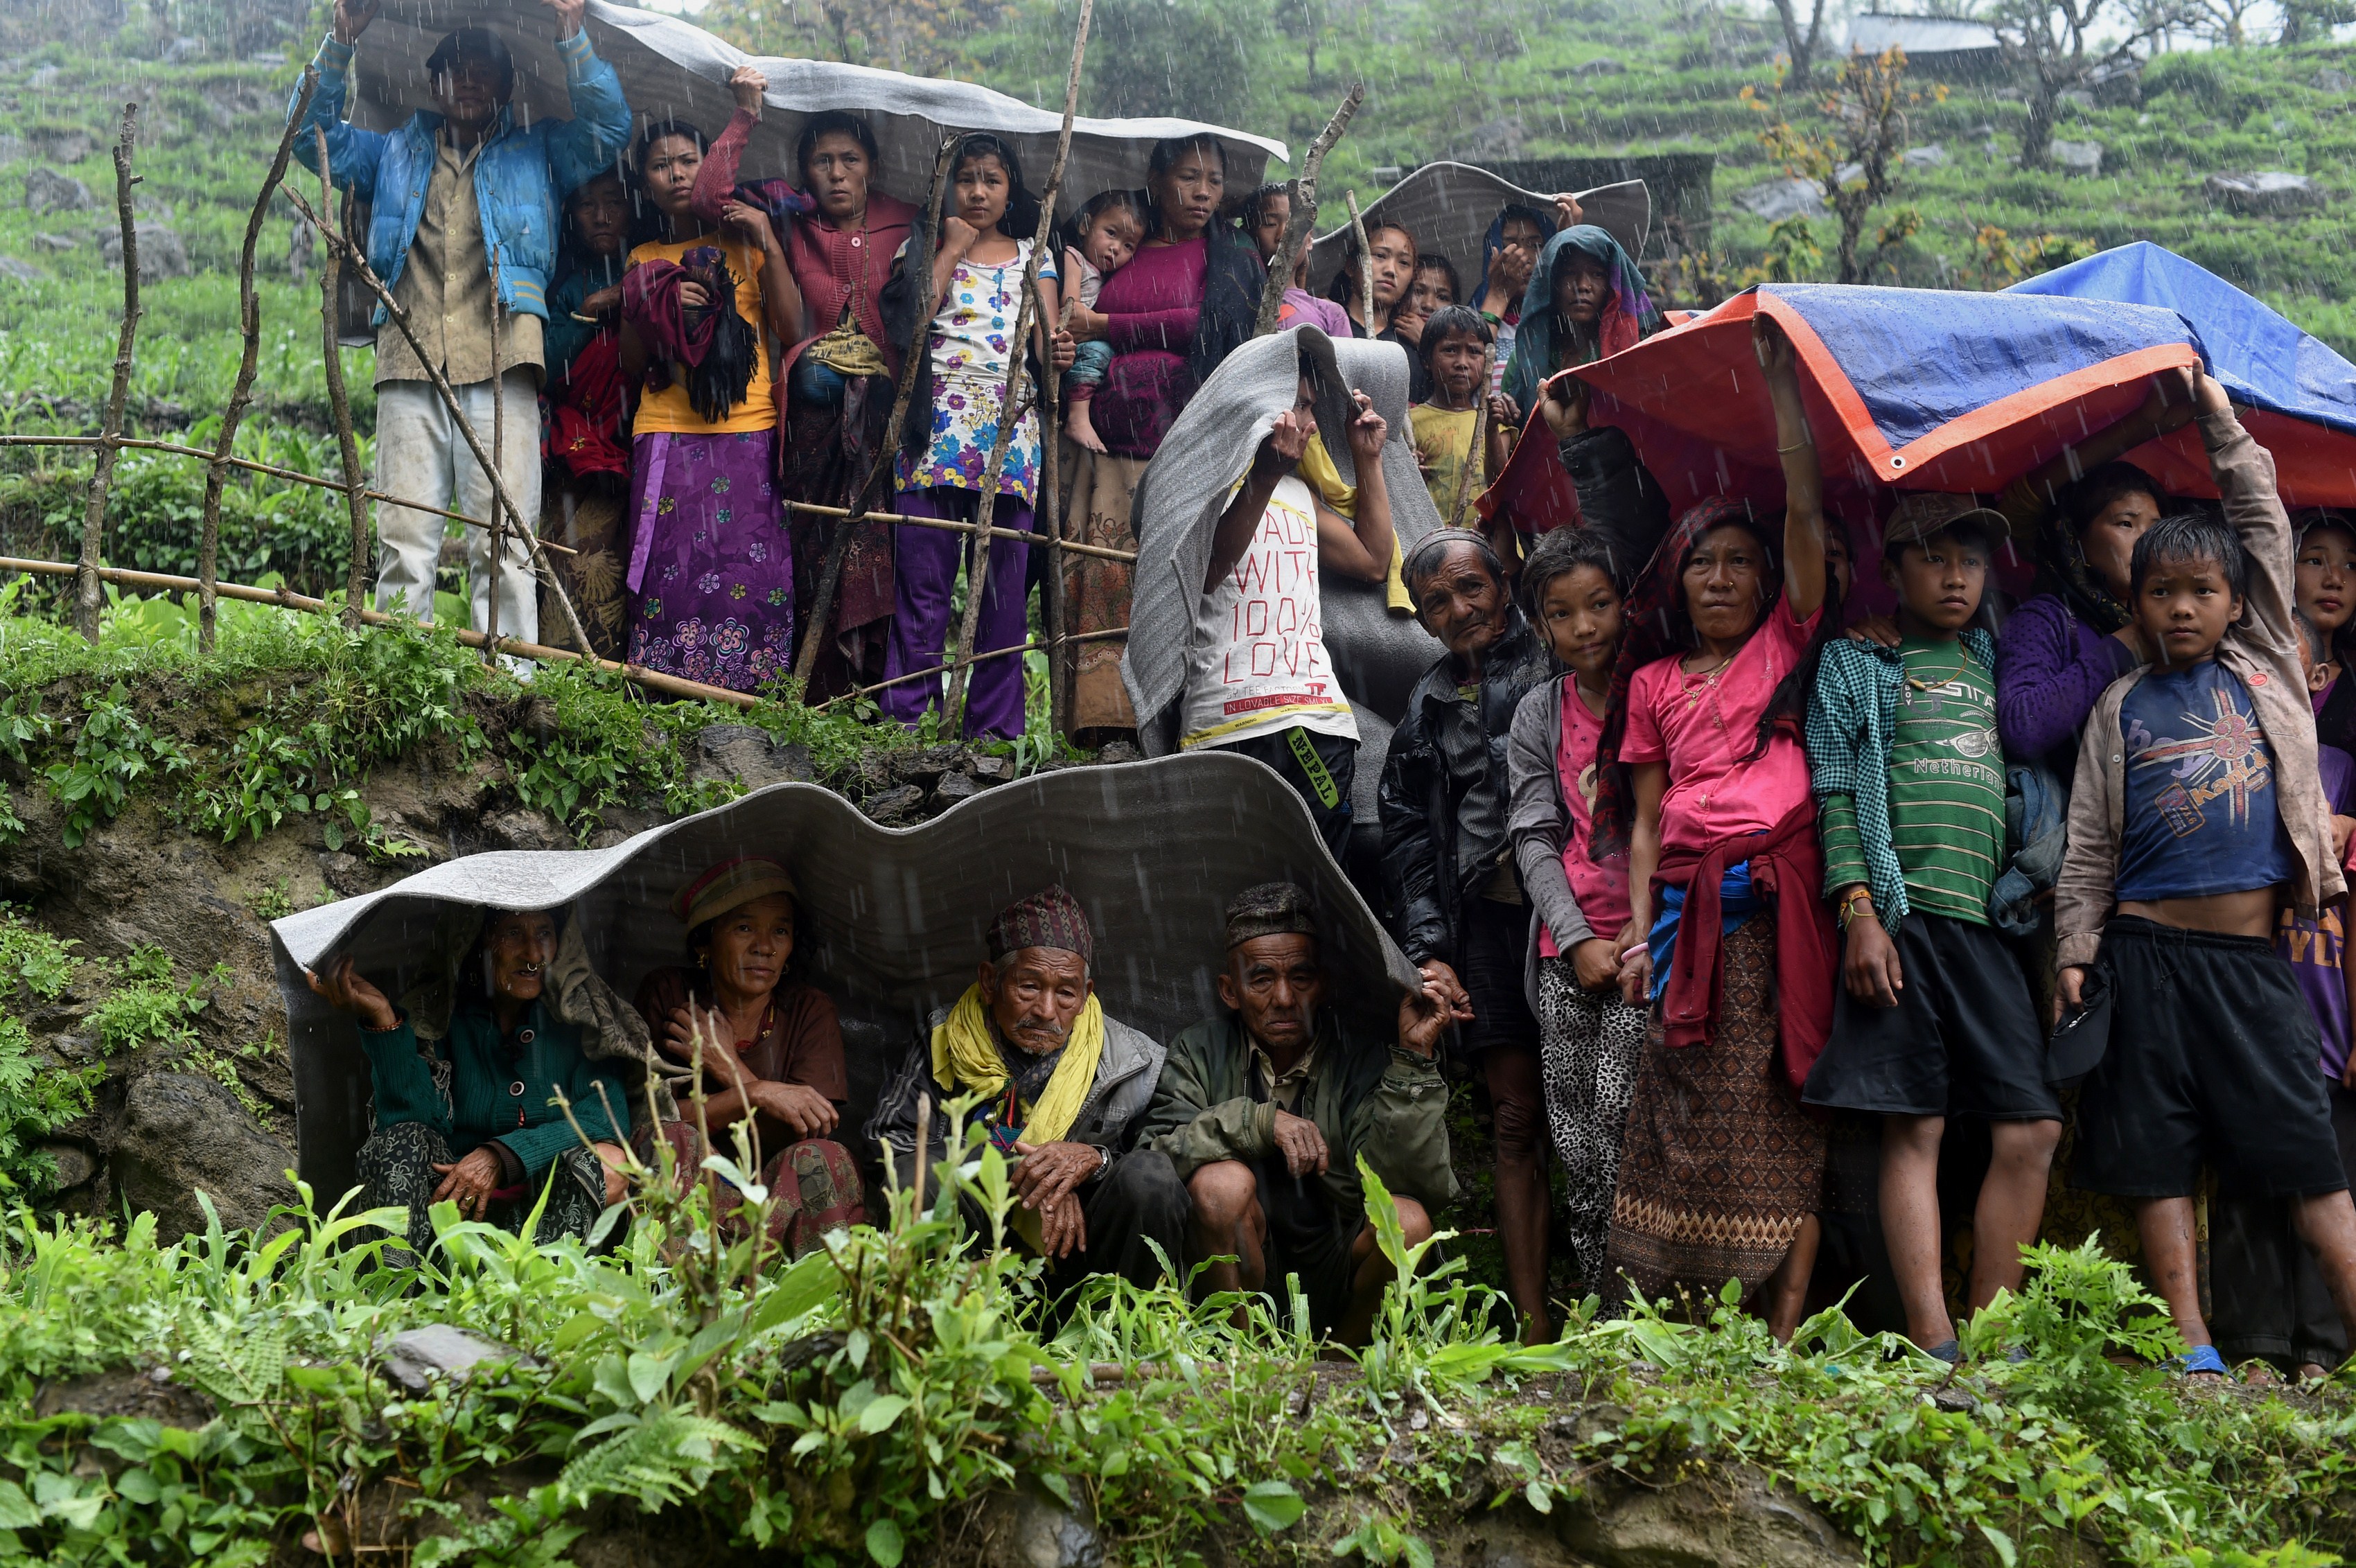 Nepalese villagers shelter from rain as an Indian Army helicopter delivers aid following an earthquake at Lapu in Gorkha on April 28, 2015. The impoverished country's leader said relief workers had still not reached many of the worst-hit areas. (SAJJAD HUSSAIN—AFP/Getty Images)